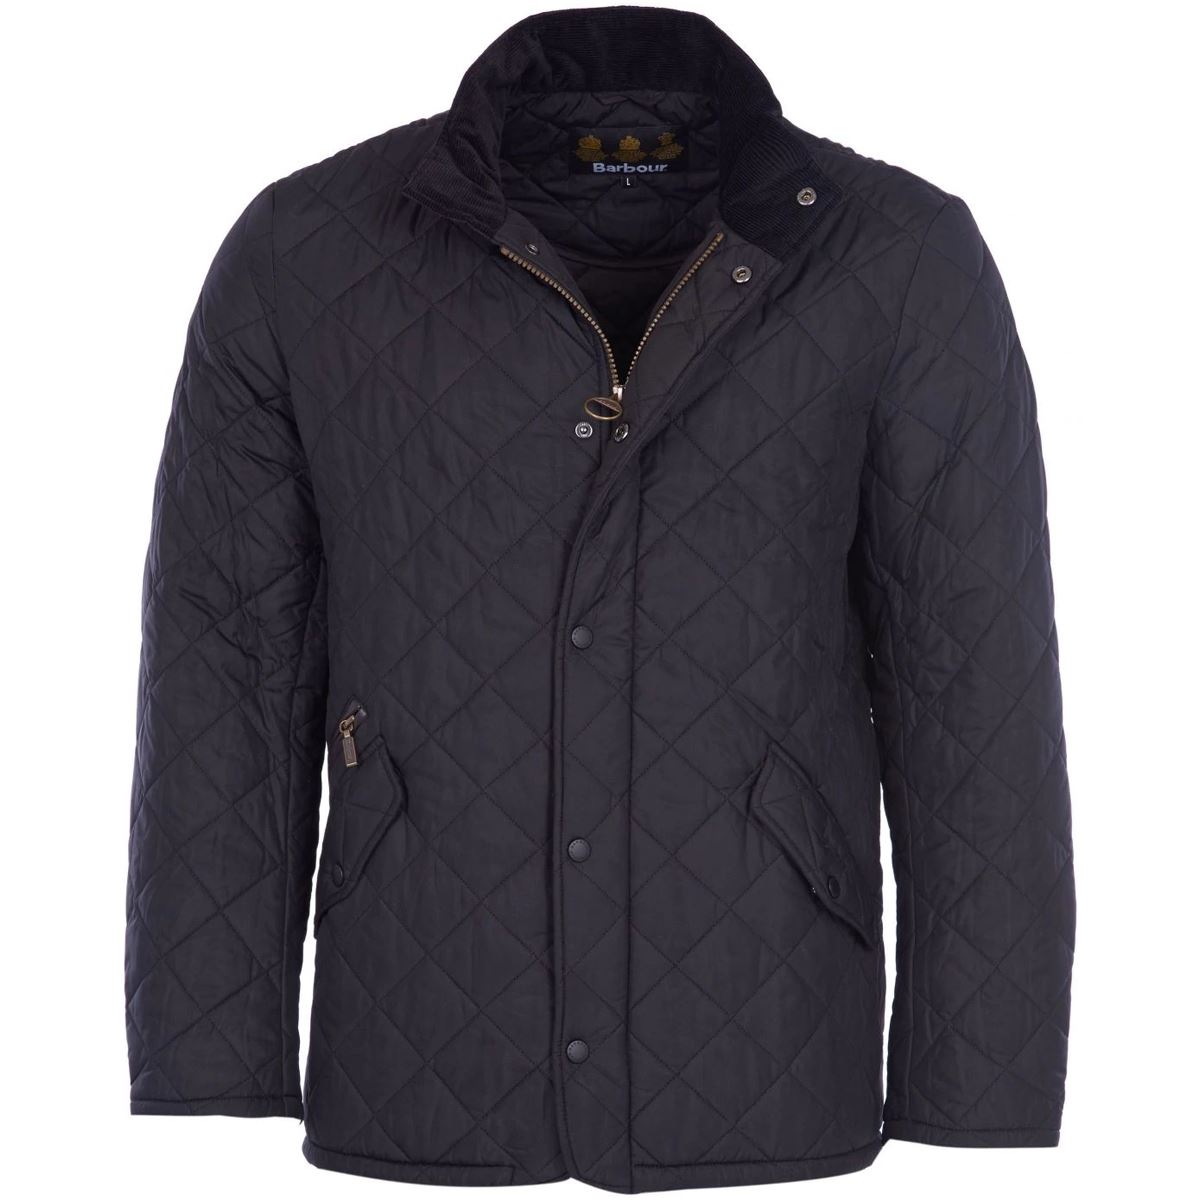 Should I size up in Barbour?